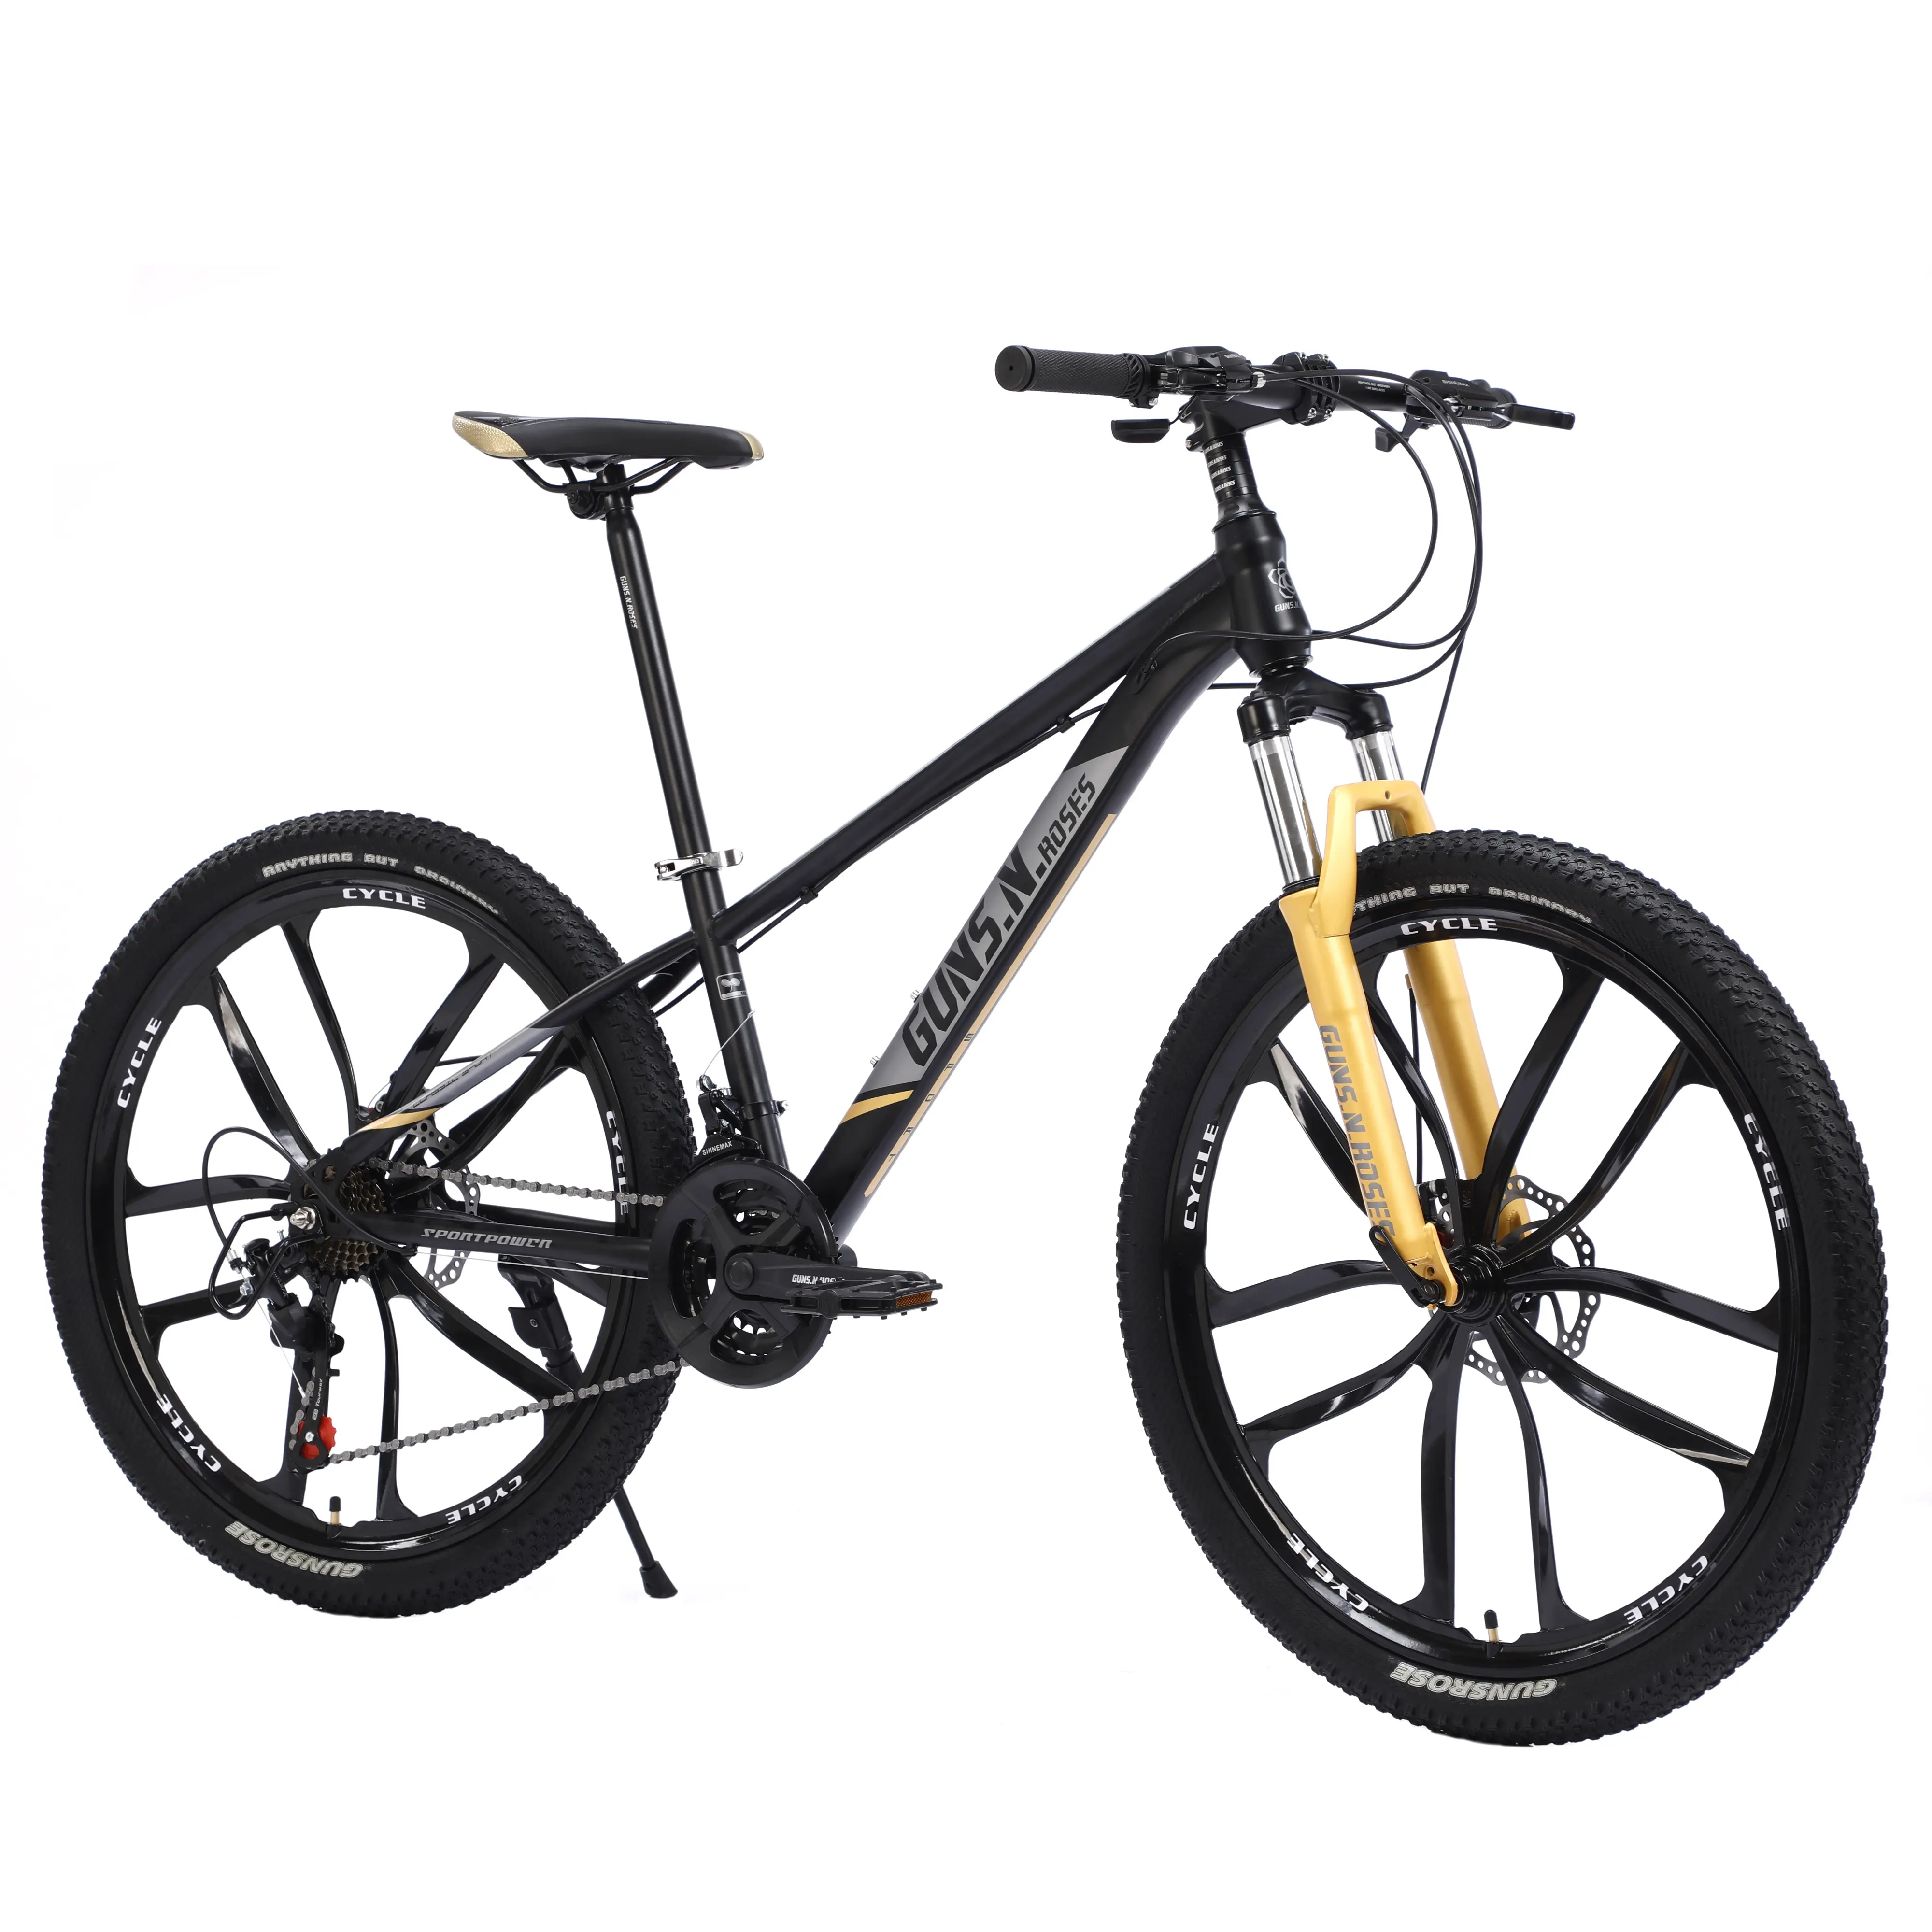 Experience Thrilling Outdoor Adventures High-Performance Mountain Bike Lightweight Durable and Equipped with Powerful Suspension